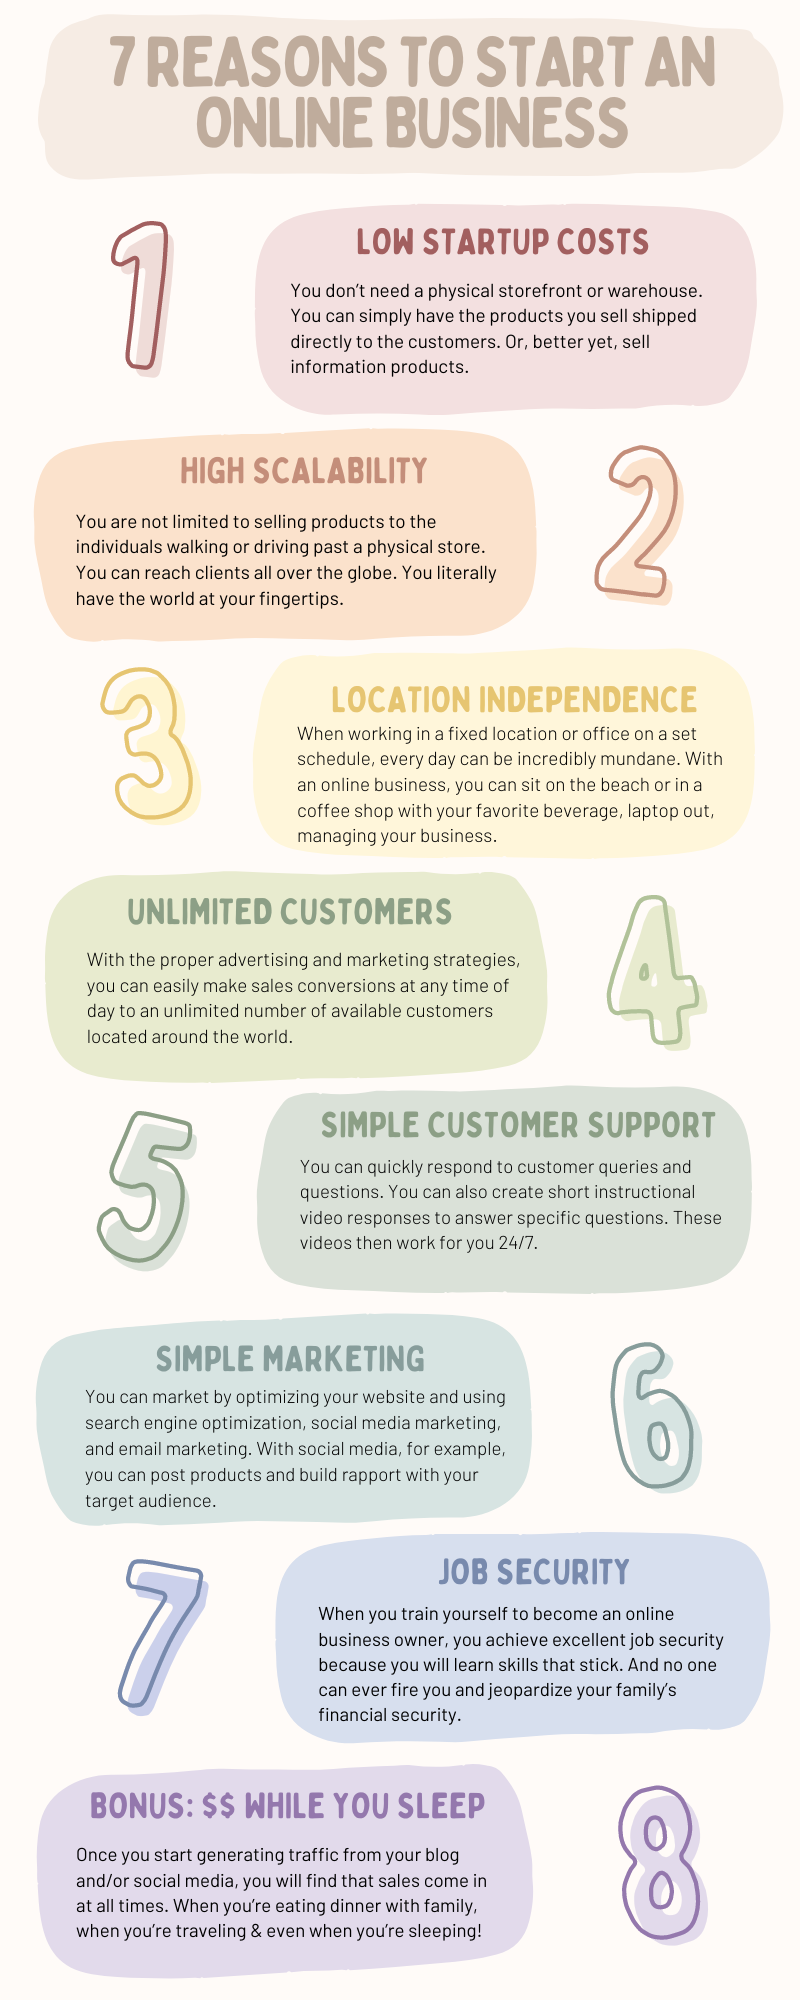 infographic about starting a small business in a recession...it lists the top 8 reasons to do it online